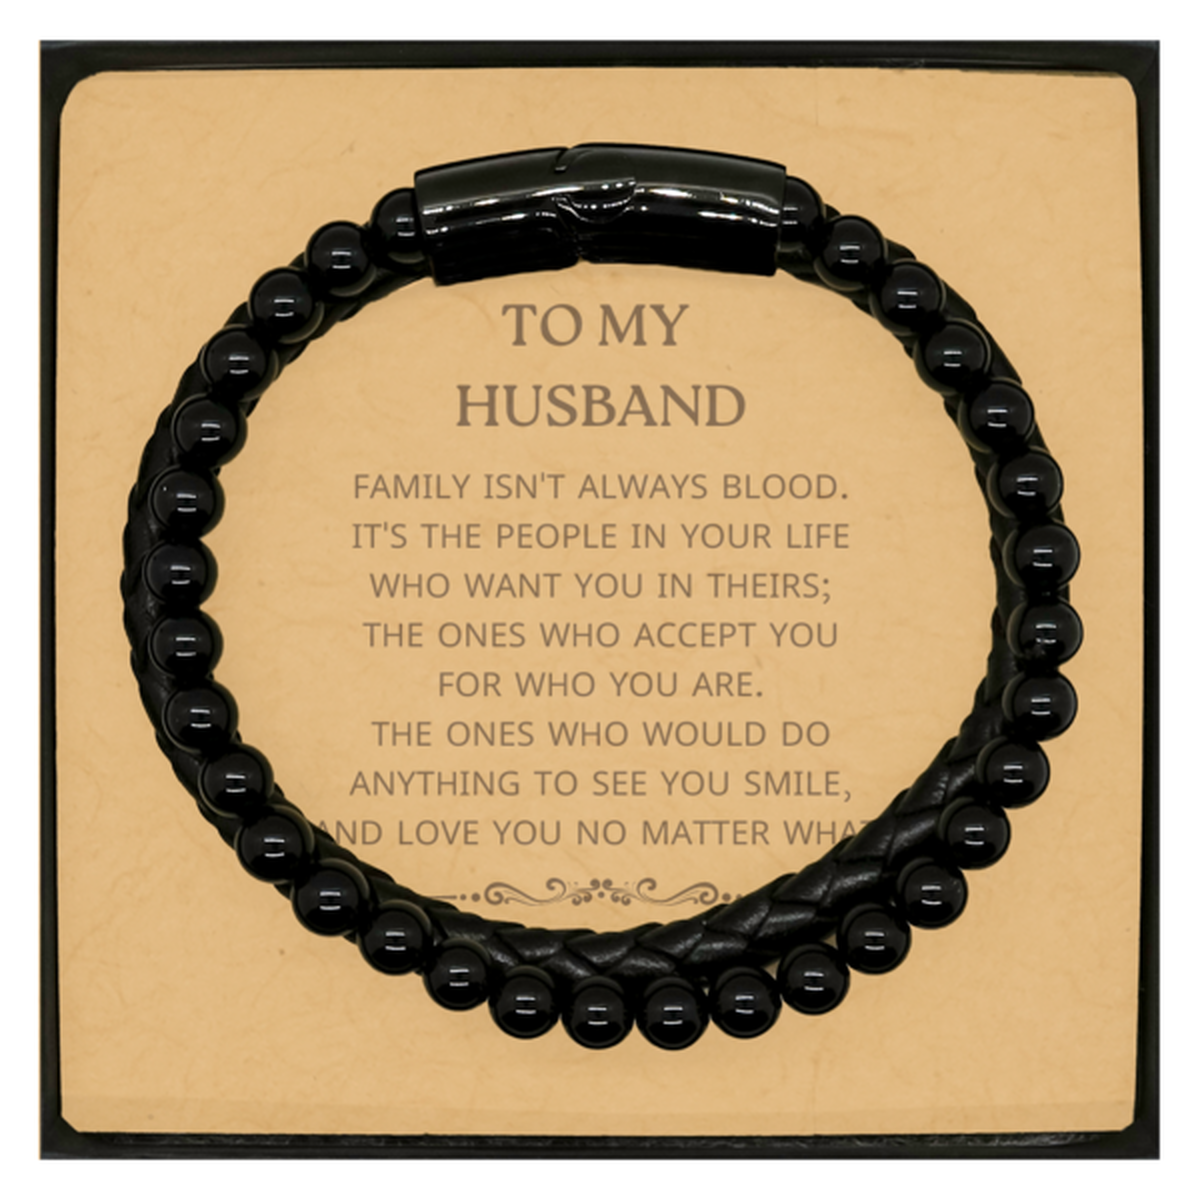 To My Husband Gifts, Family isn't always blood, Husband Stone Leather Bracelets, Birthday Christmas Unique Present For Husband